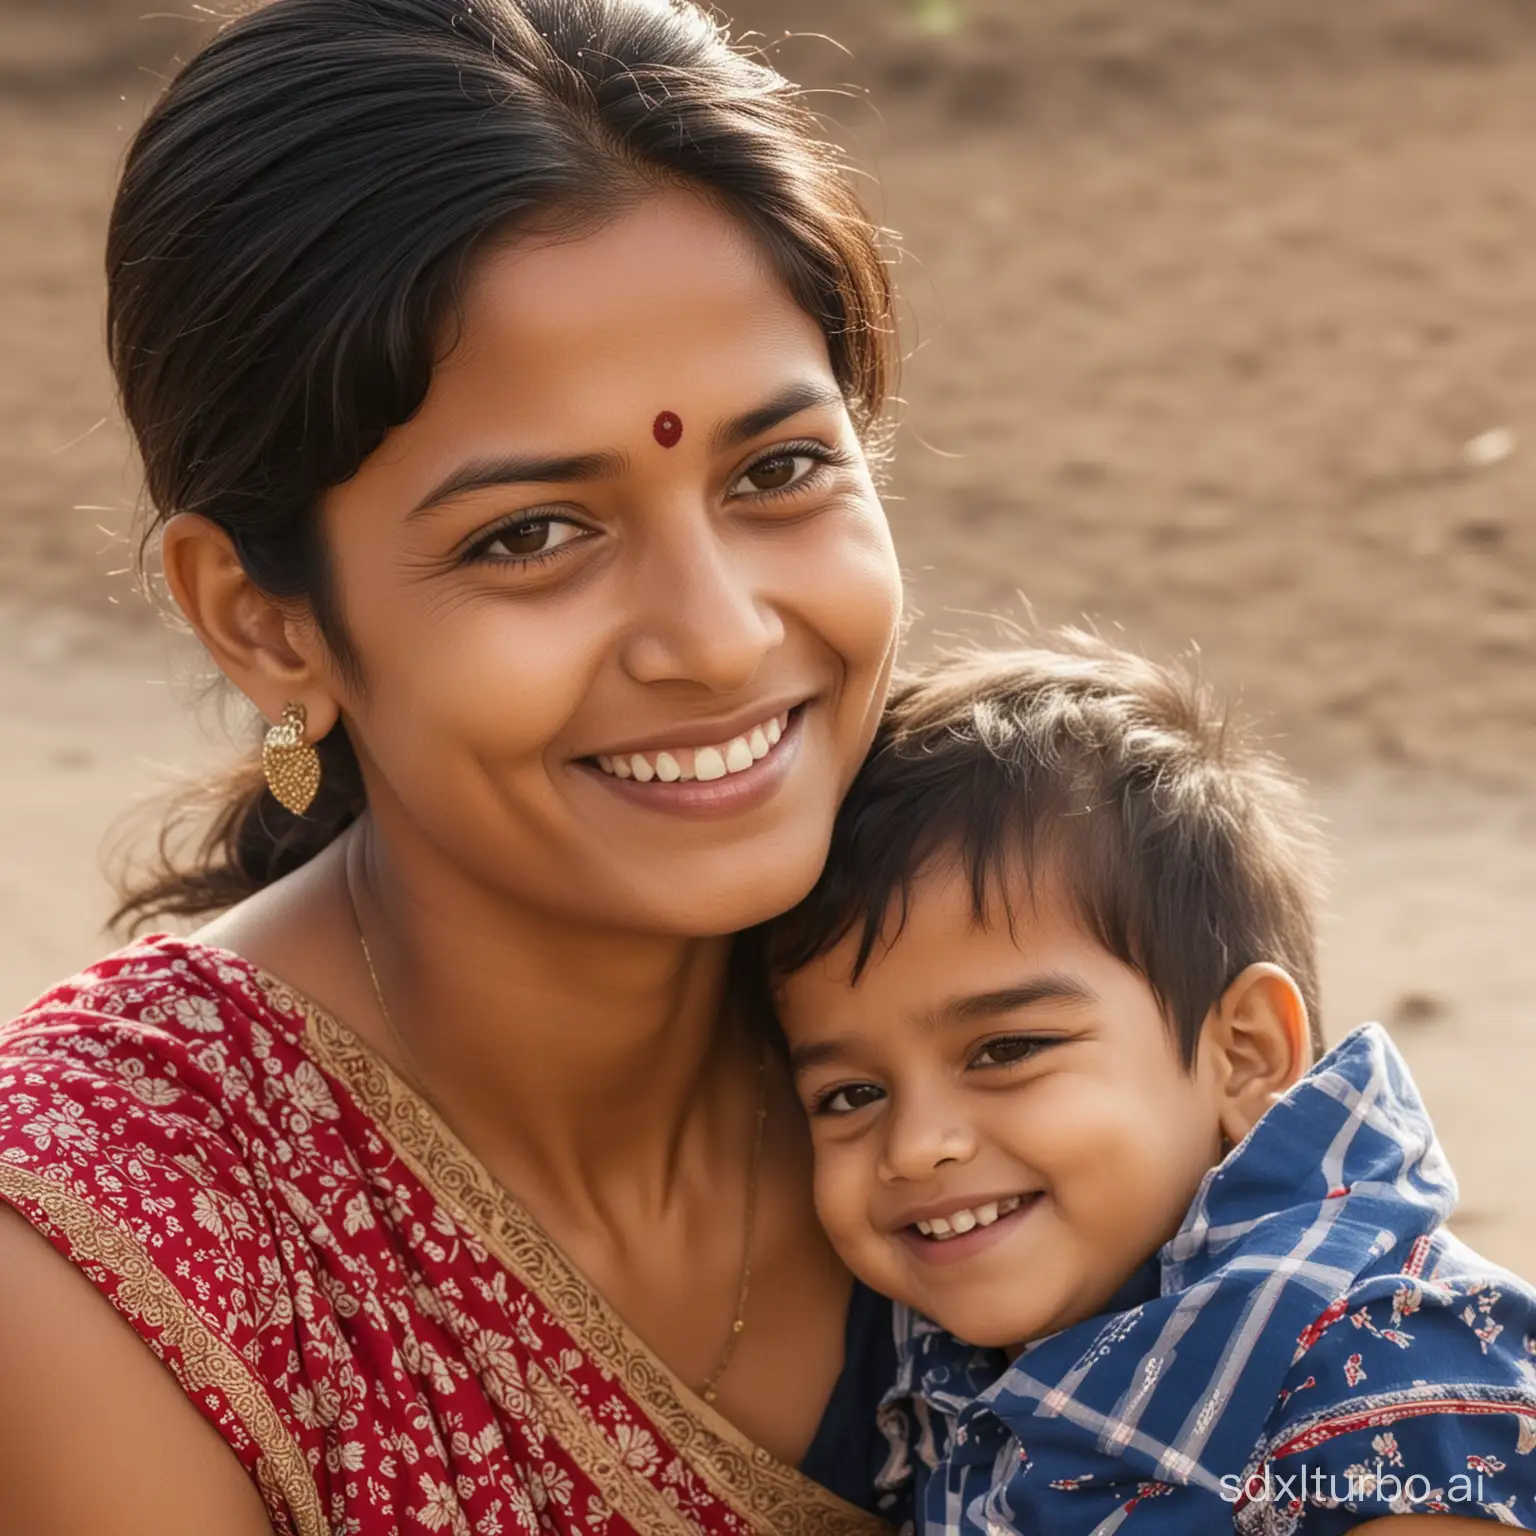 A small Indian boy child 4 years old smiling with mom